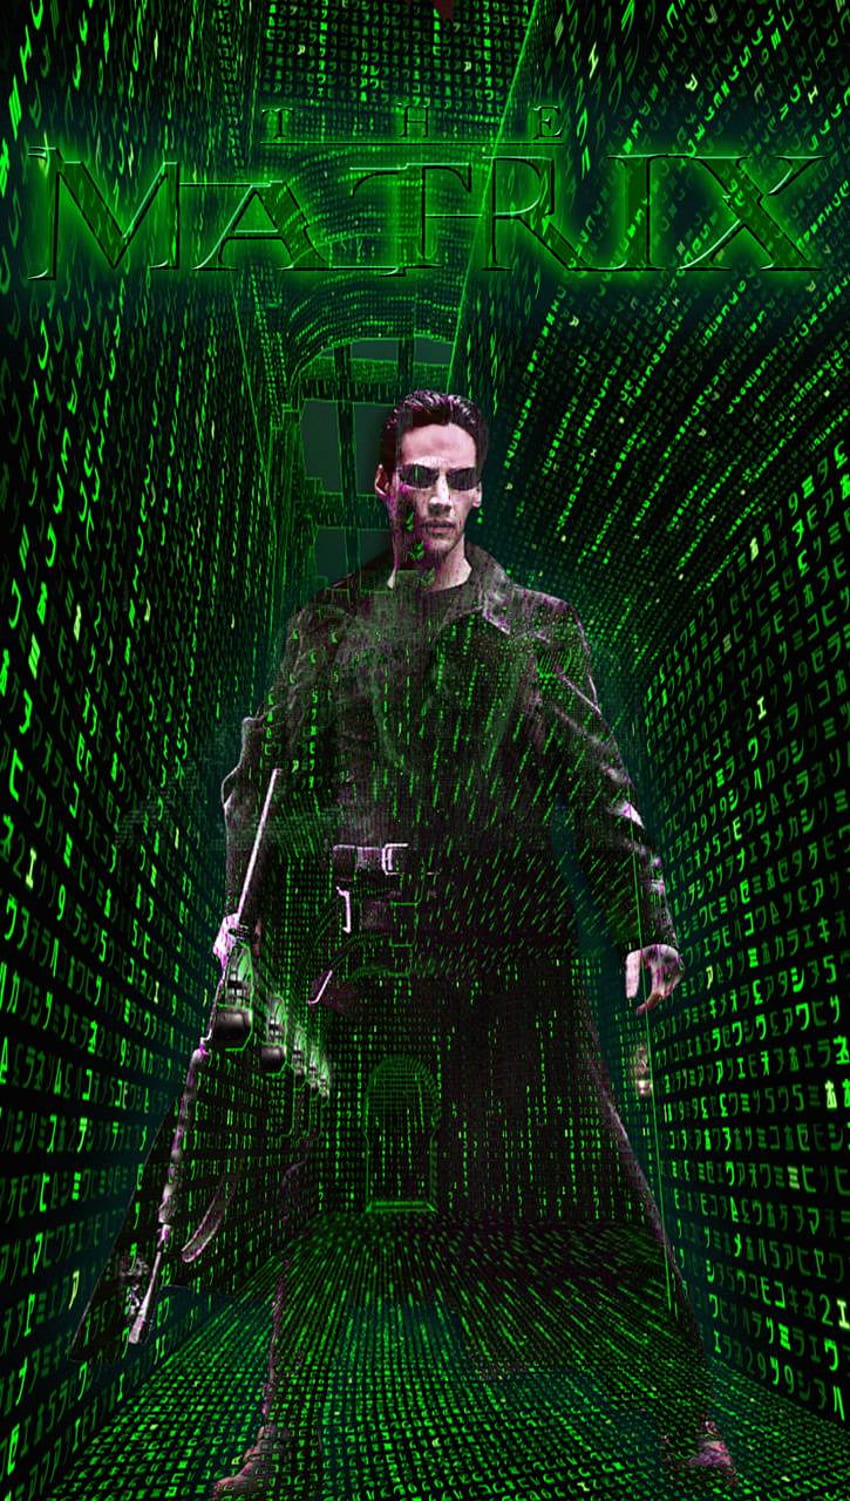 Make Morpheus Proud With Best Matrix Live Wallpaper For Android -  TalkAndroid.com